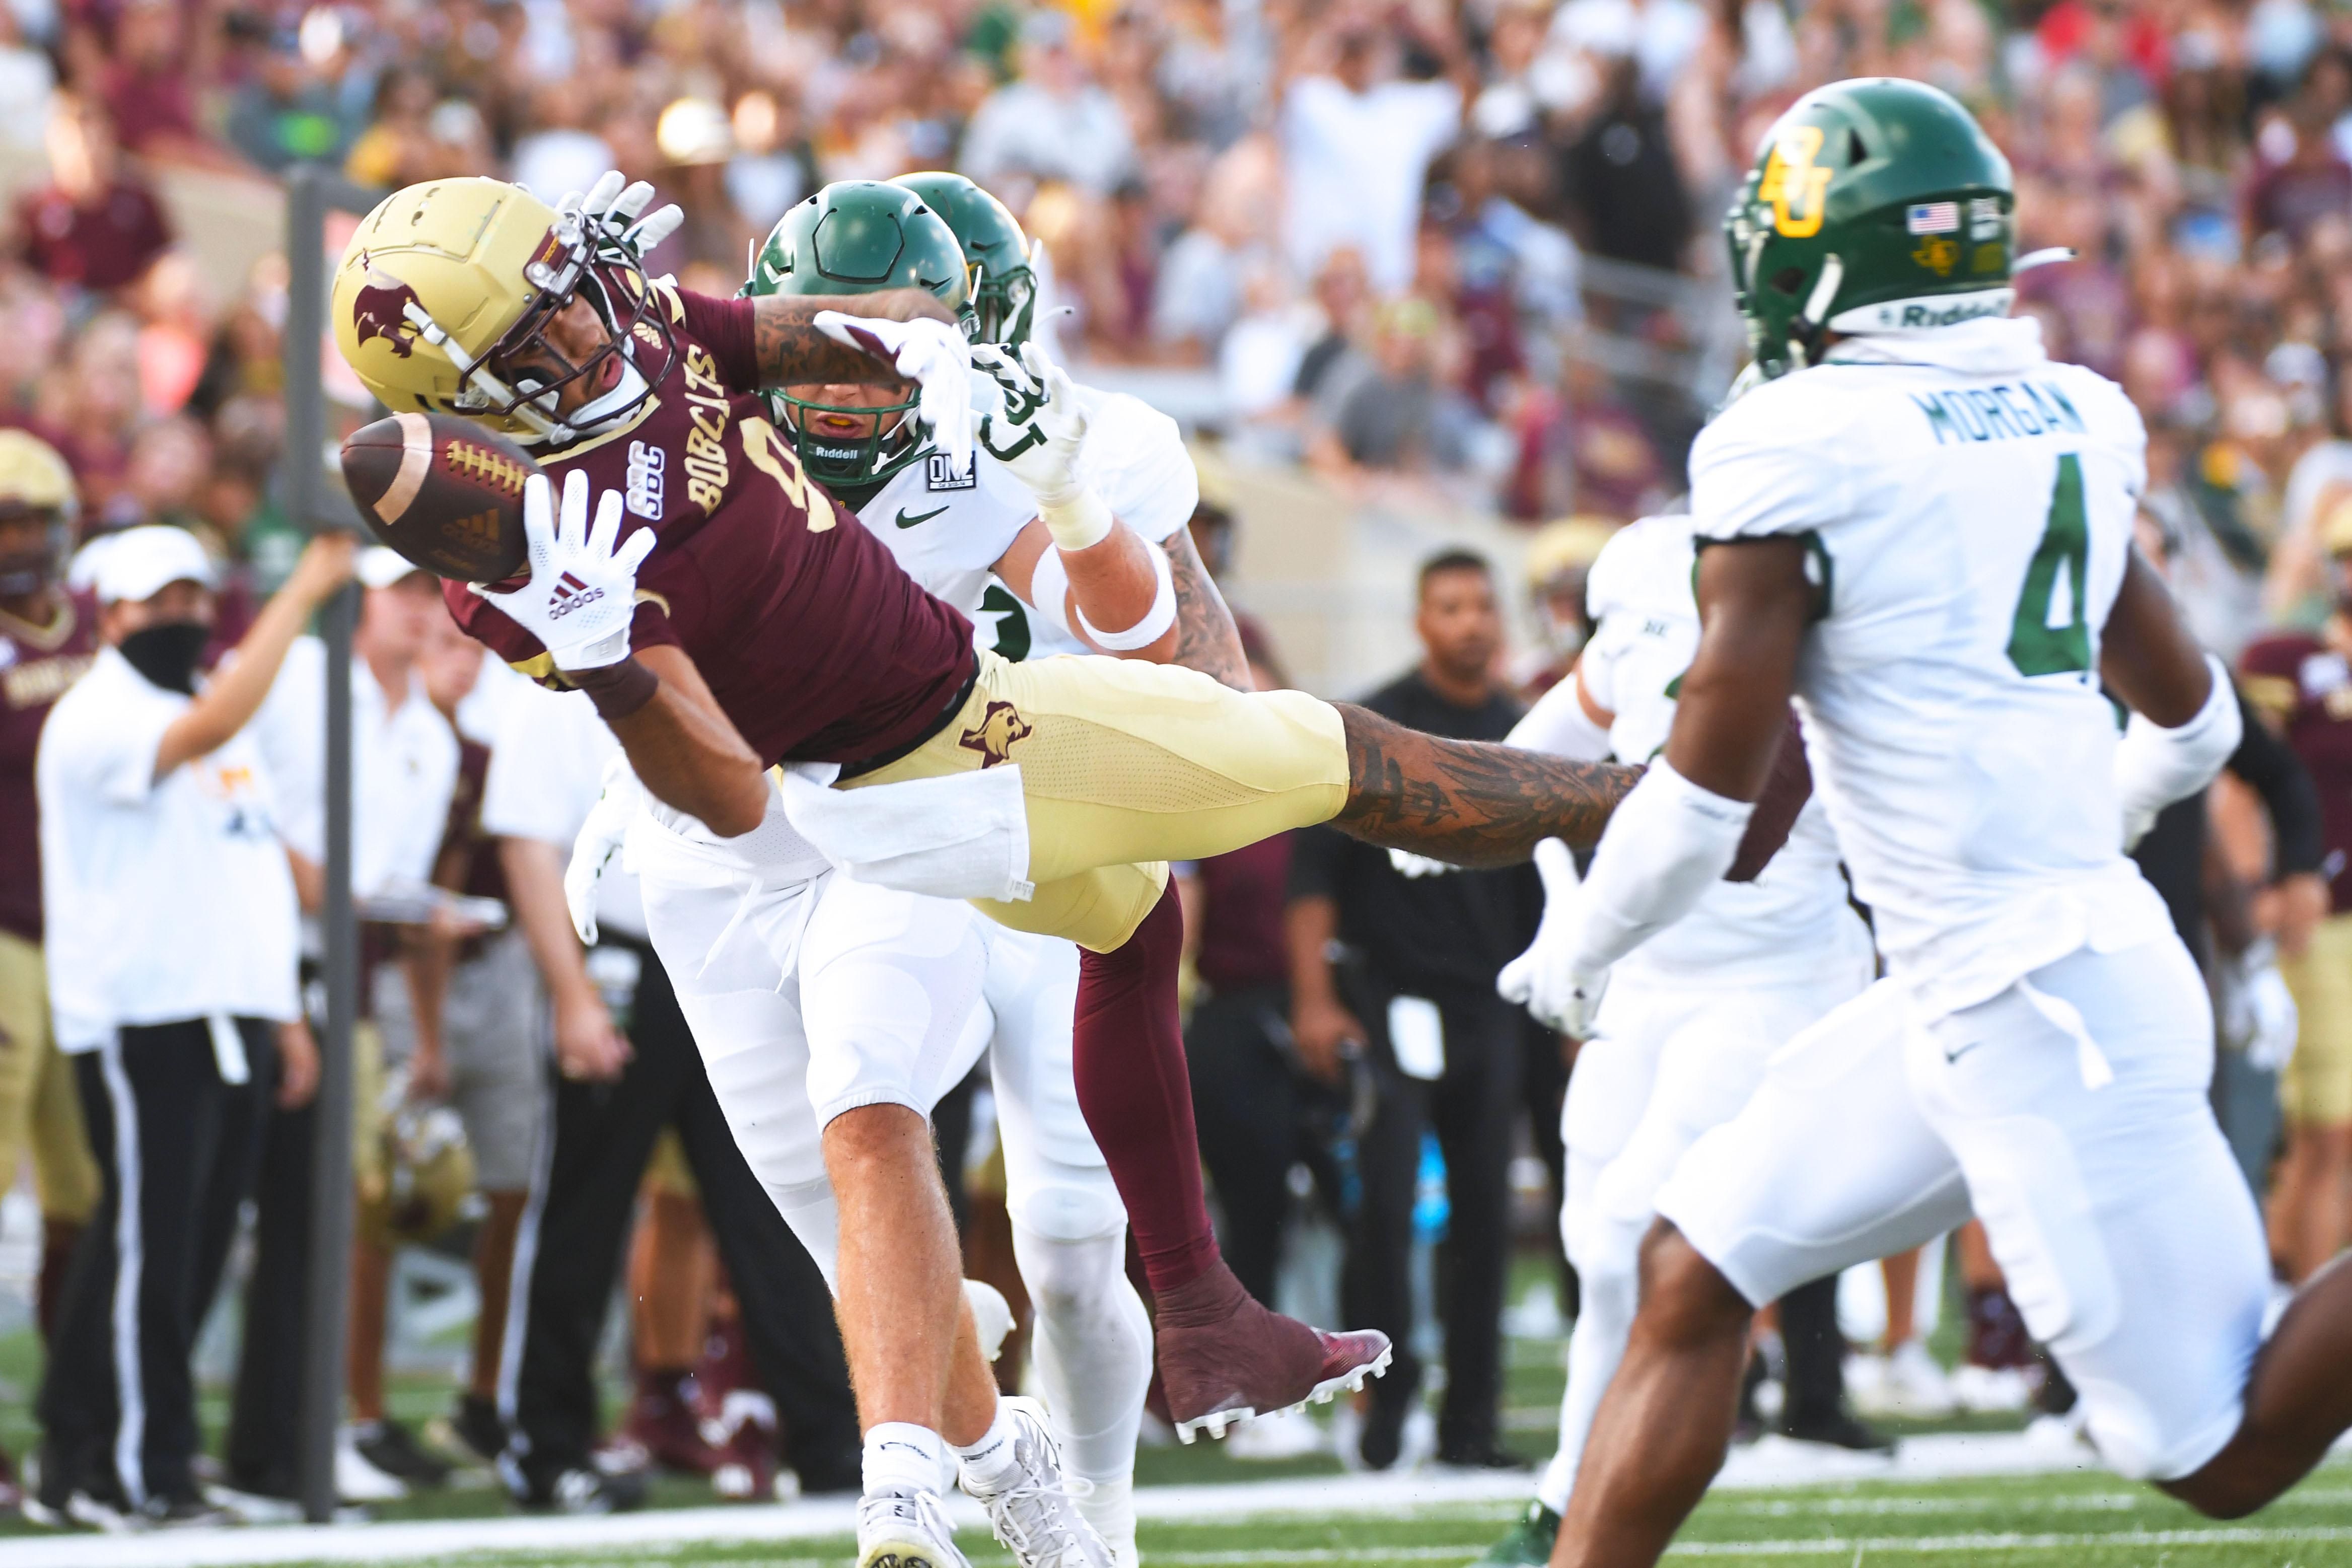 Bobcats struggle with depth issues again in loss to Eastern Michigan